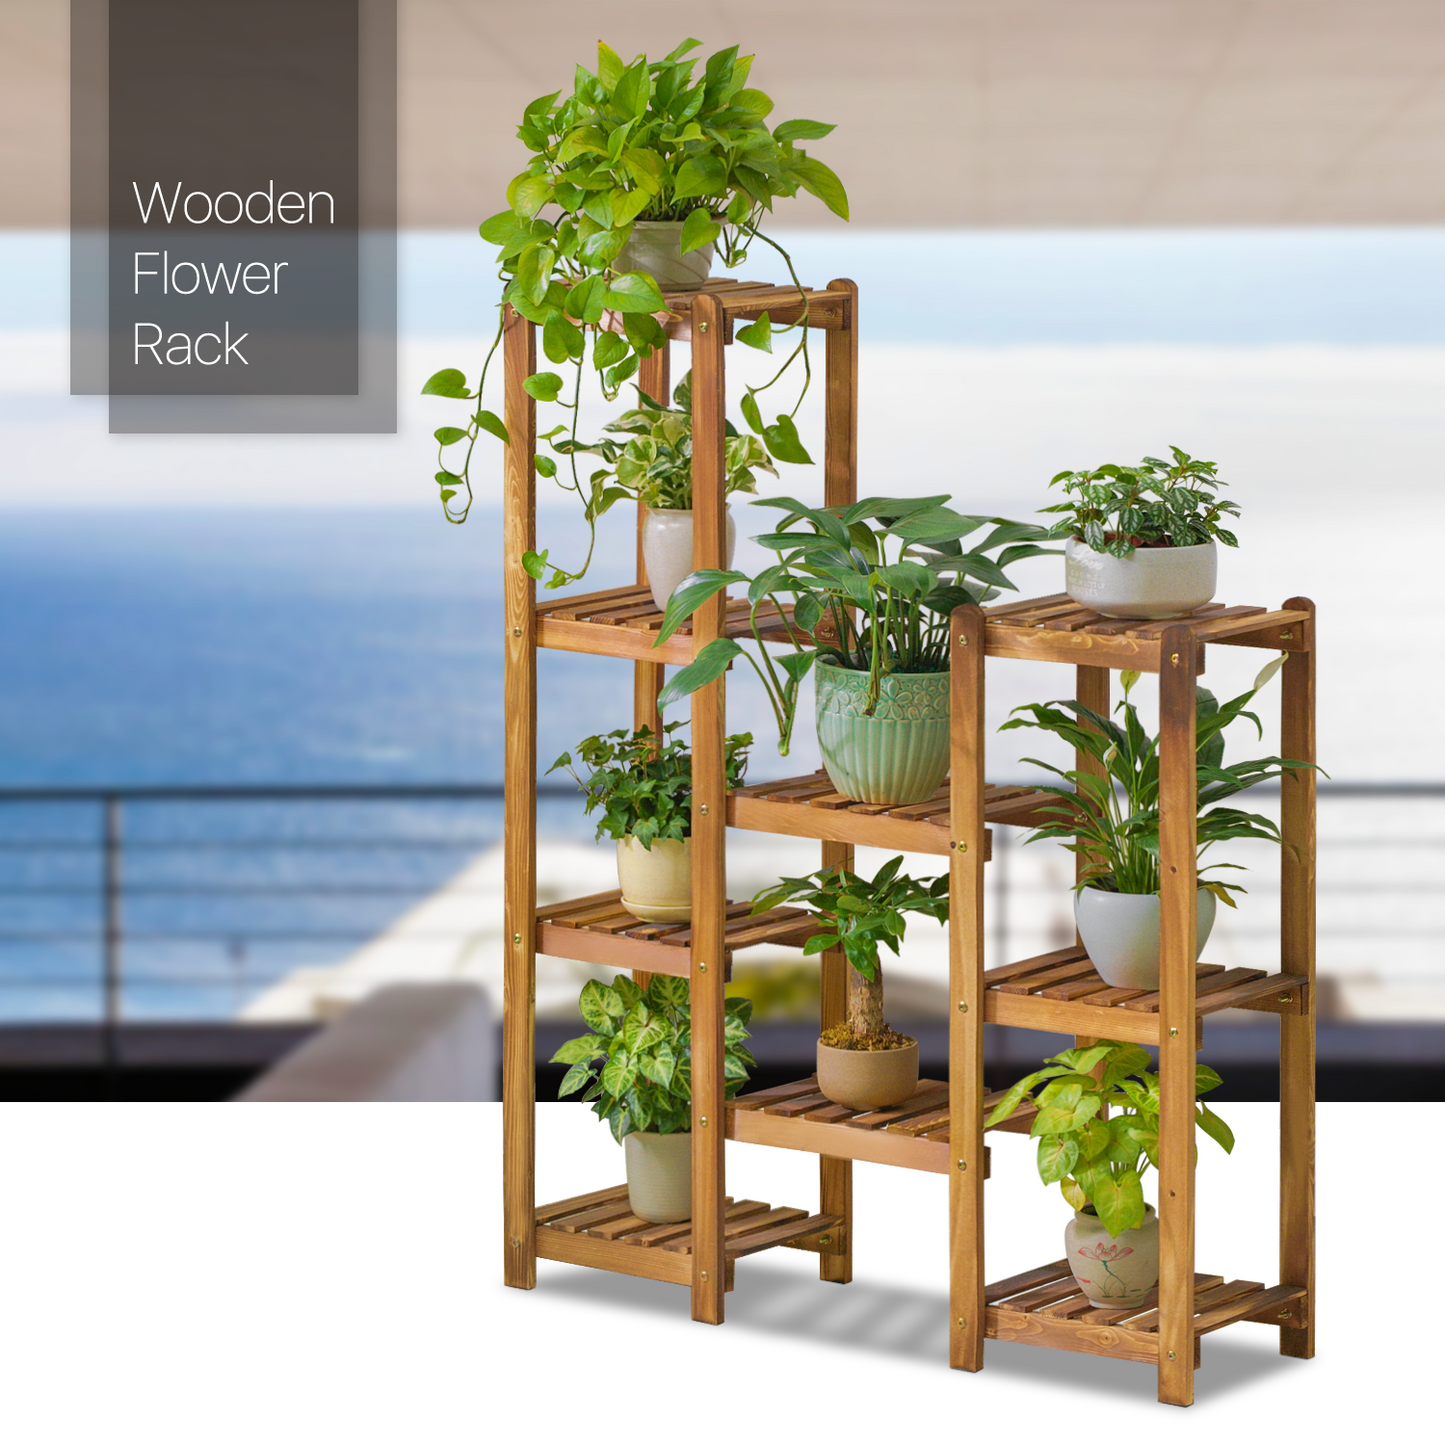 Flower Plant Stand Display Shelf Assembly - Carbonized